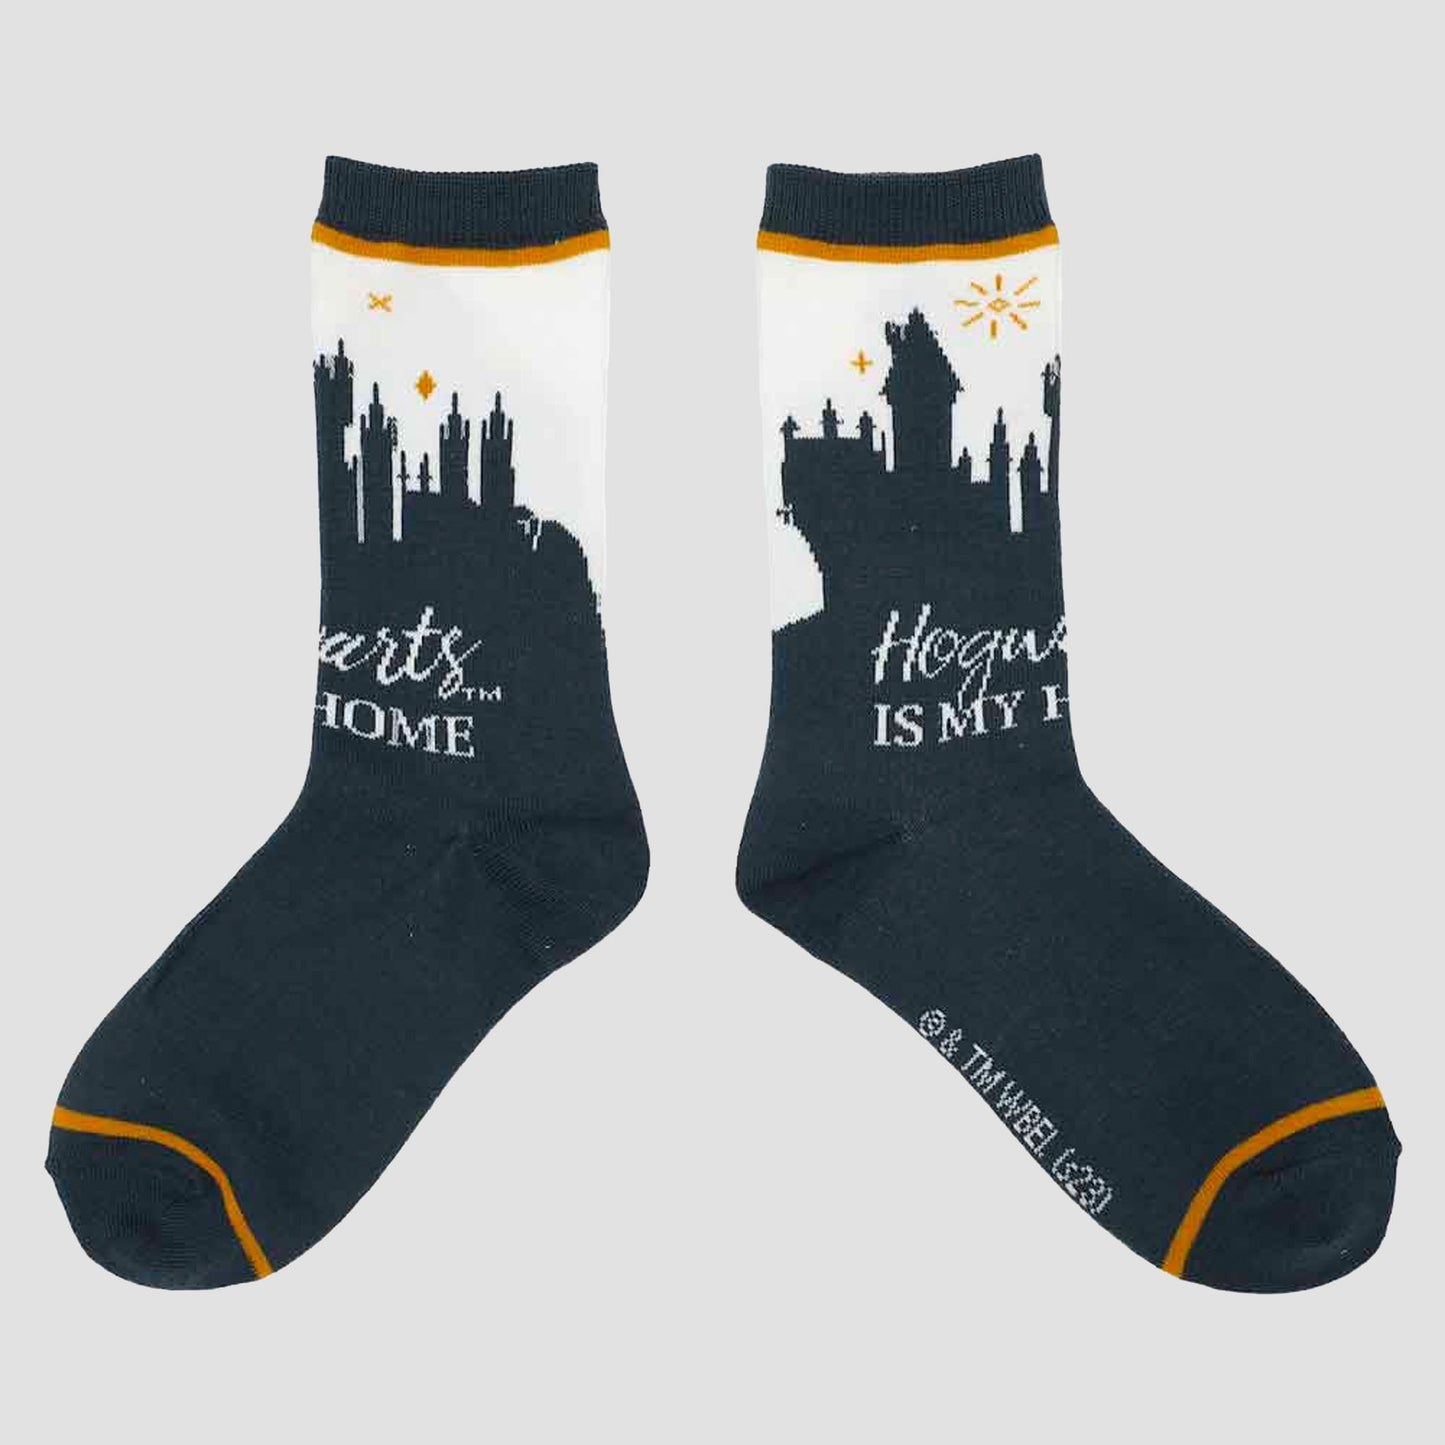 Load image into Gallery viewer, Floral Hogwarts (Harry Potter) Crew Socks 5 Pair Set
